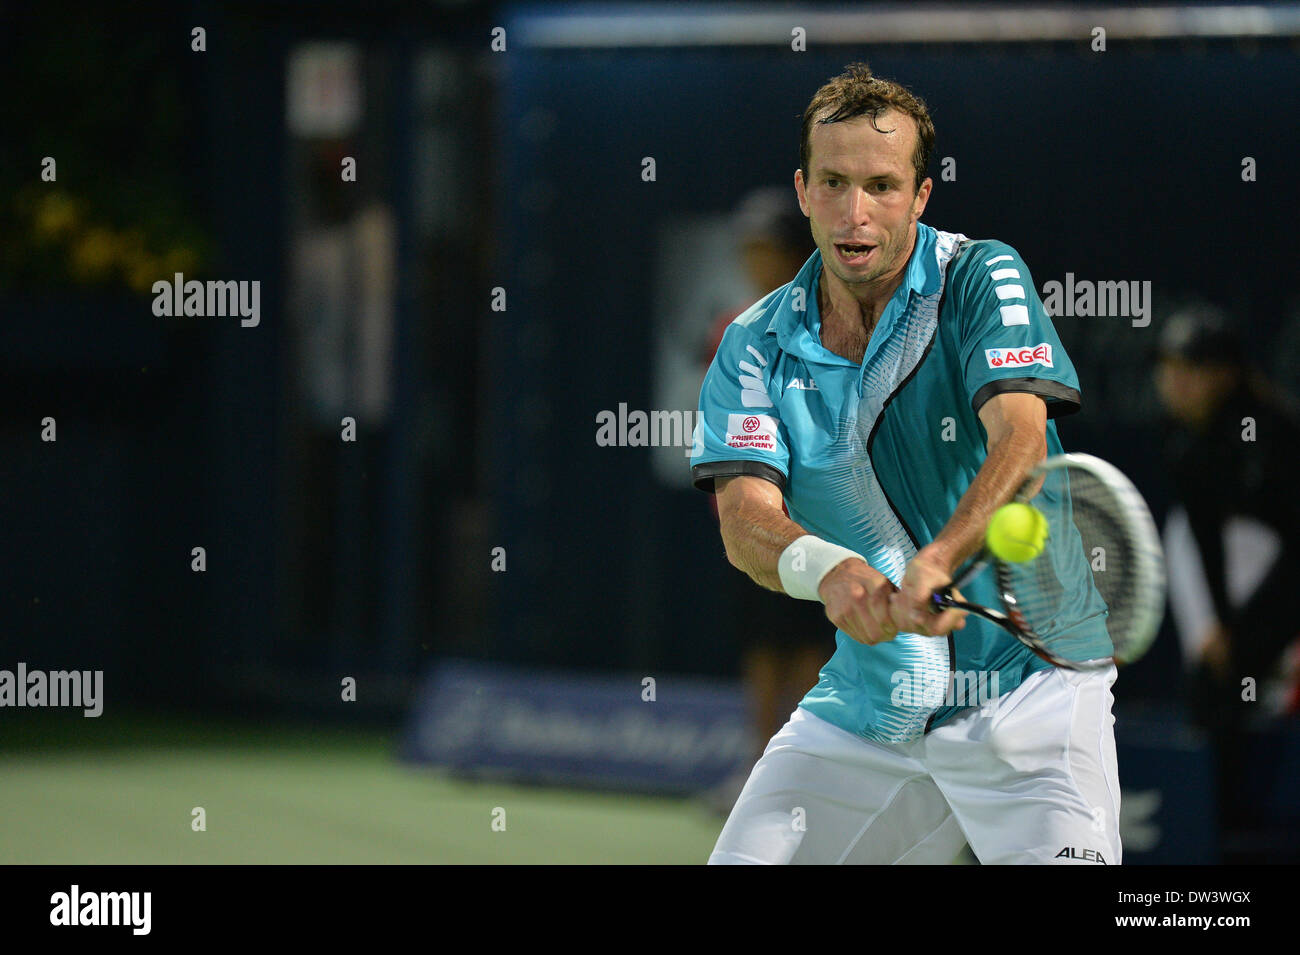 Dubai Championships 2012 Results Day 2: Andy Murray, Roger Federer Advance  